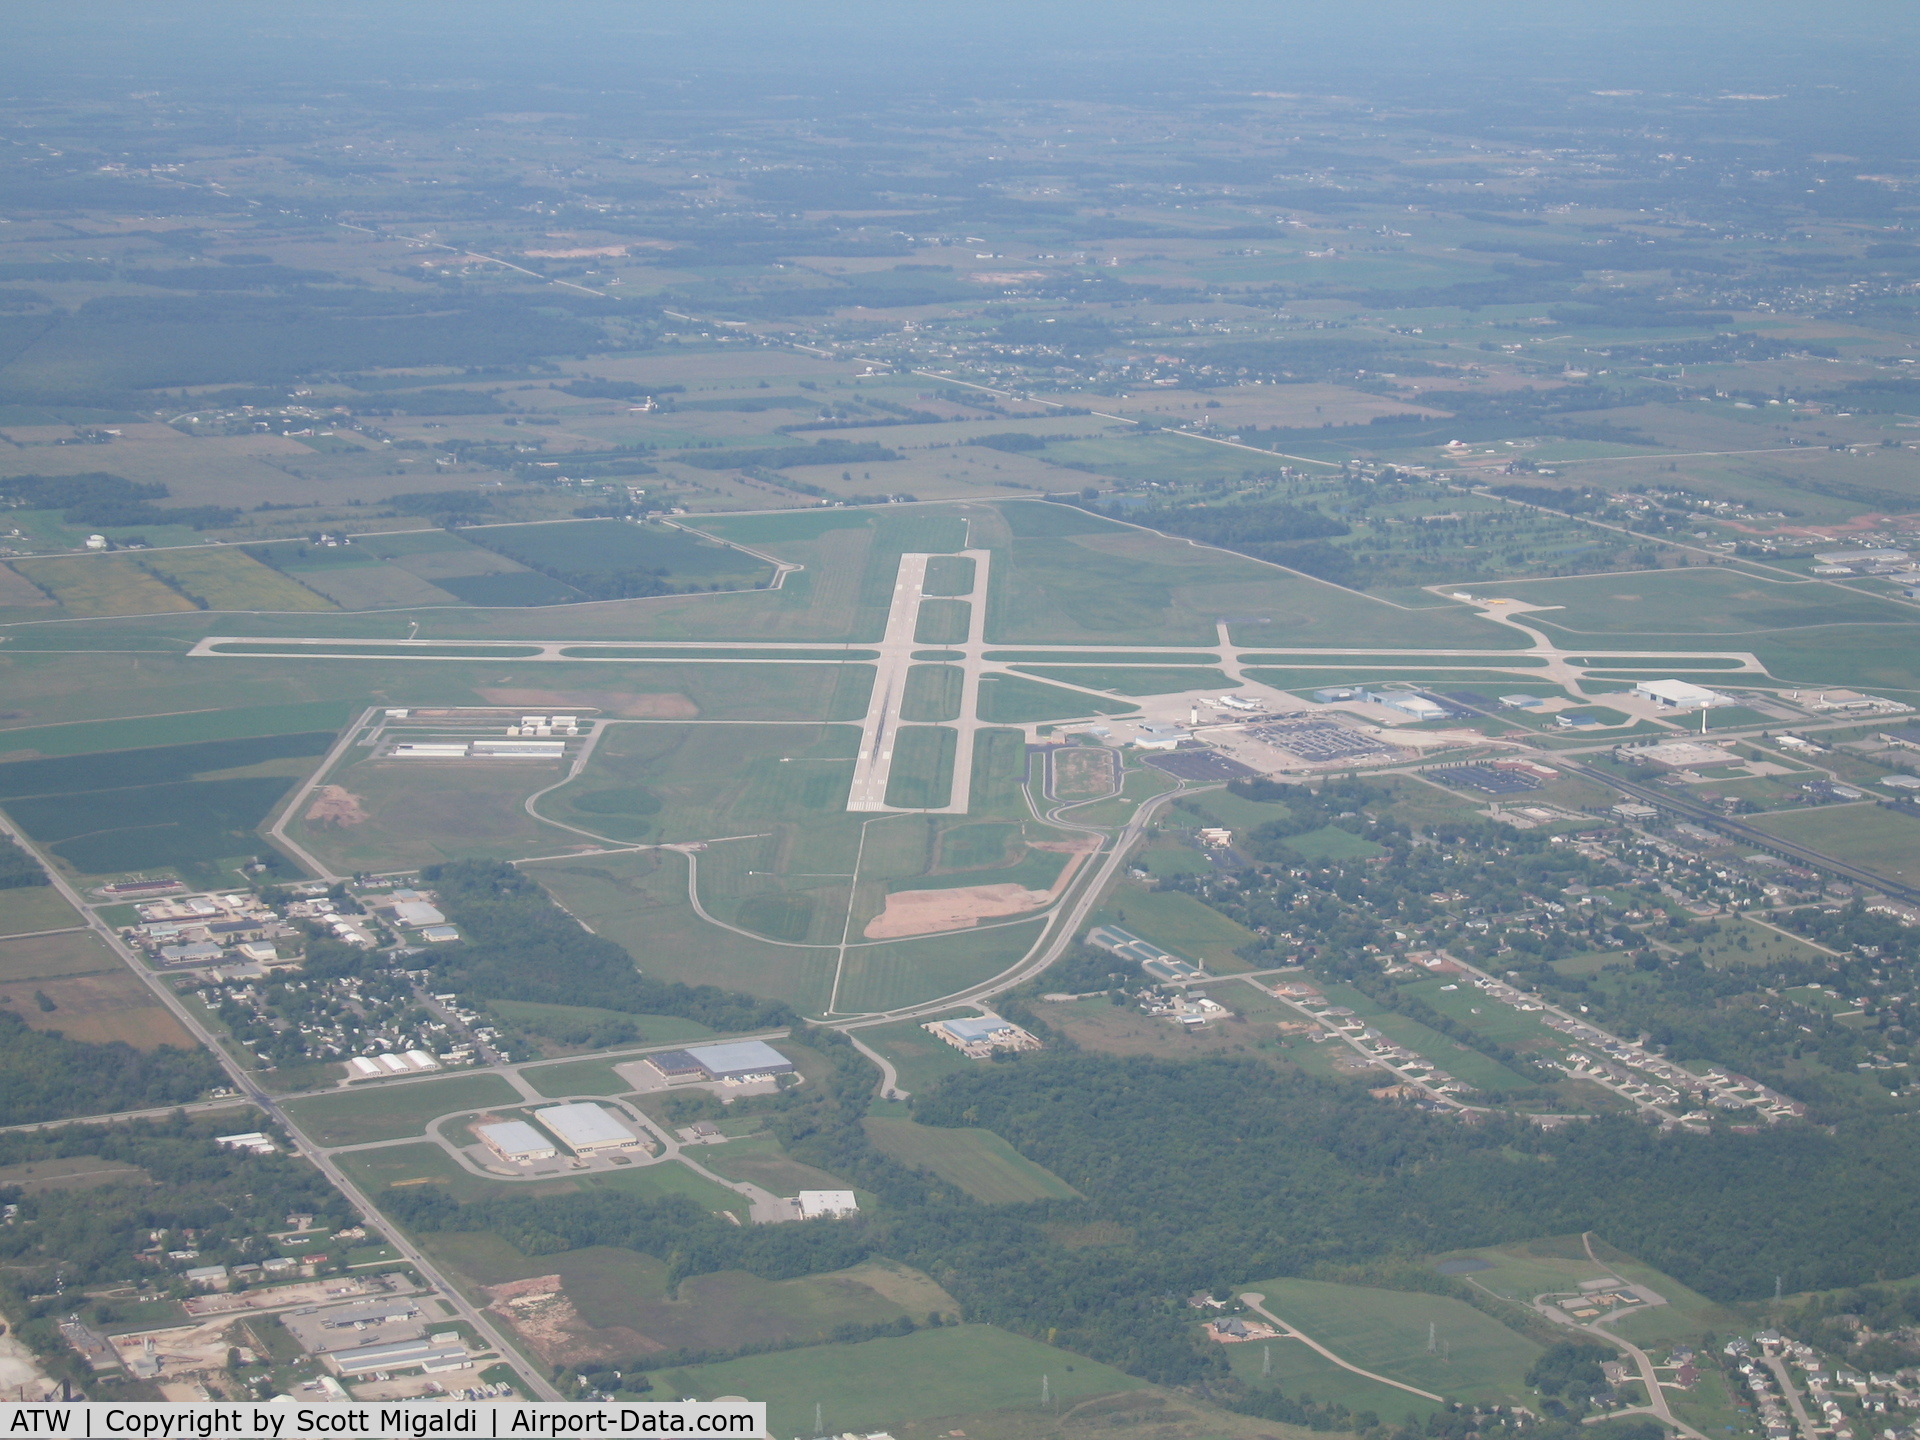 Outagamie County Regional Airport (ATW) - Taken on a trip up to 6Y9